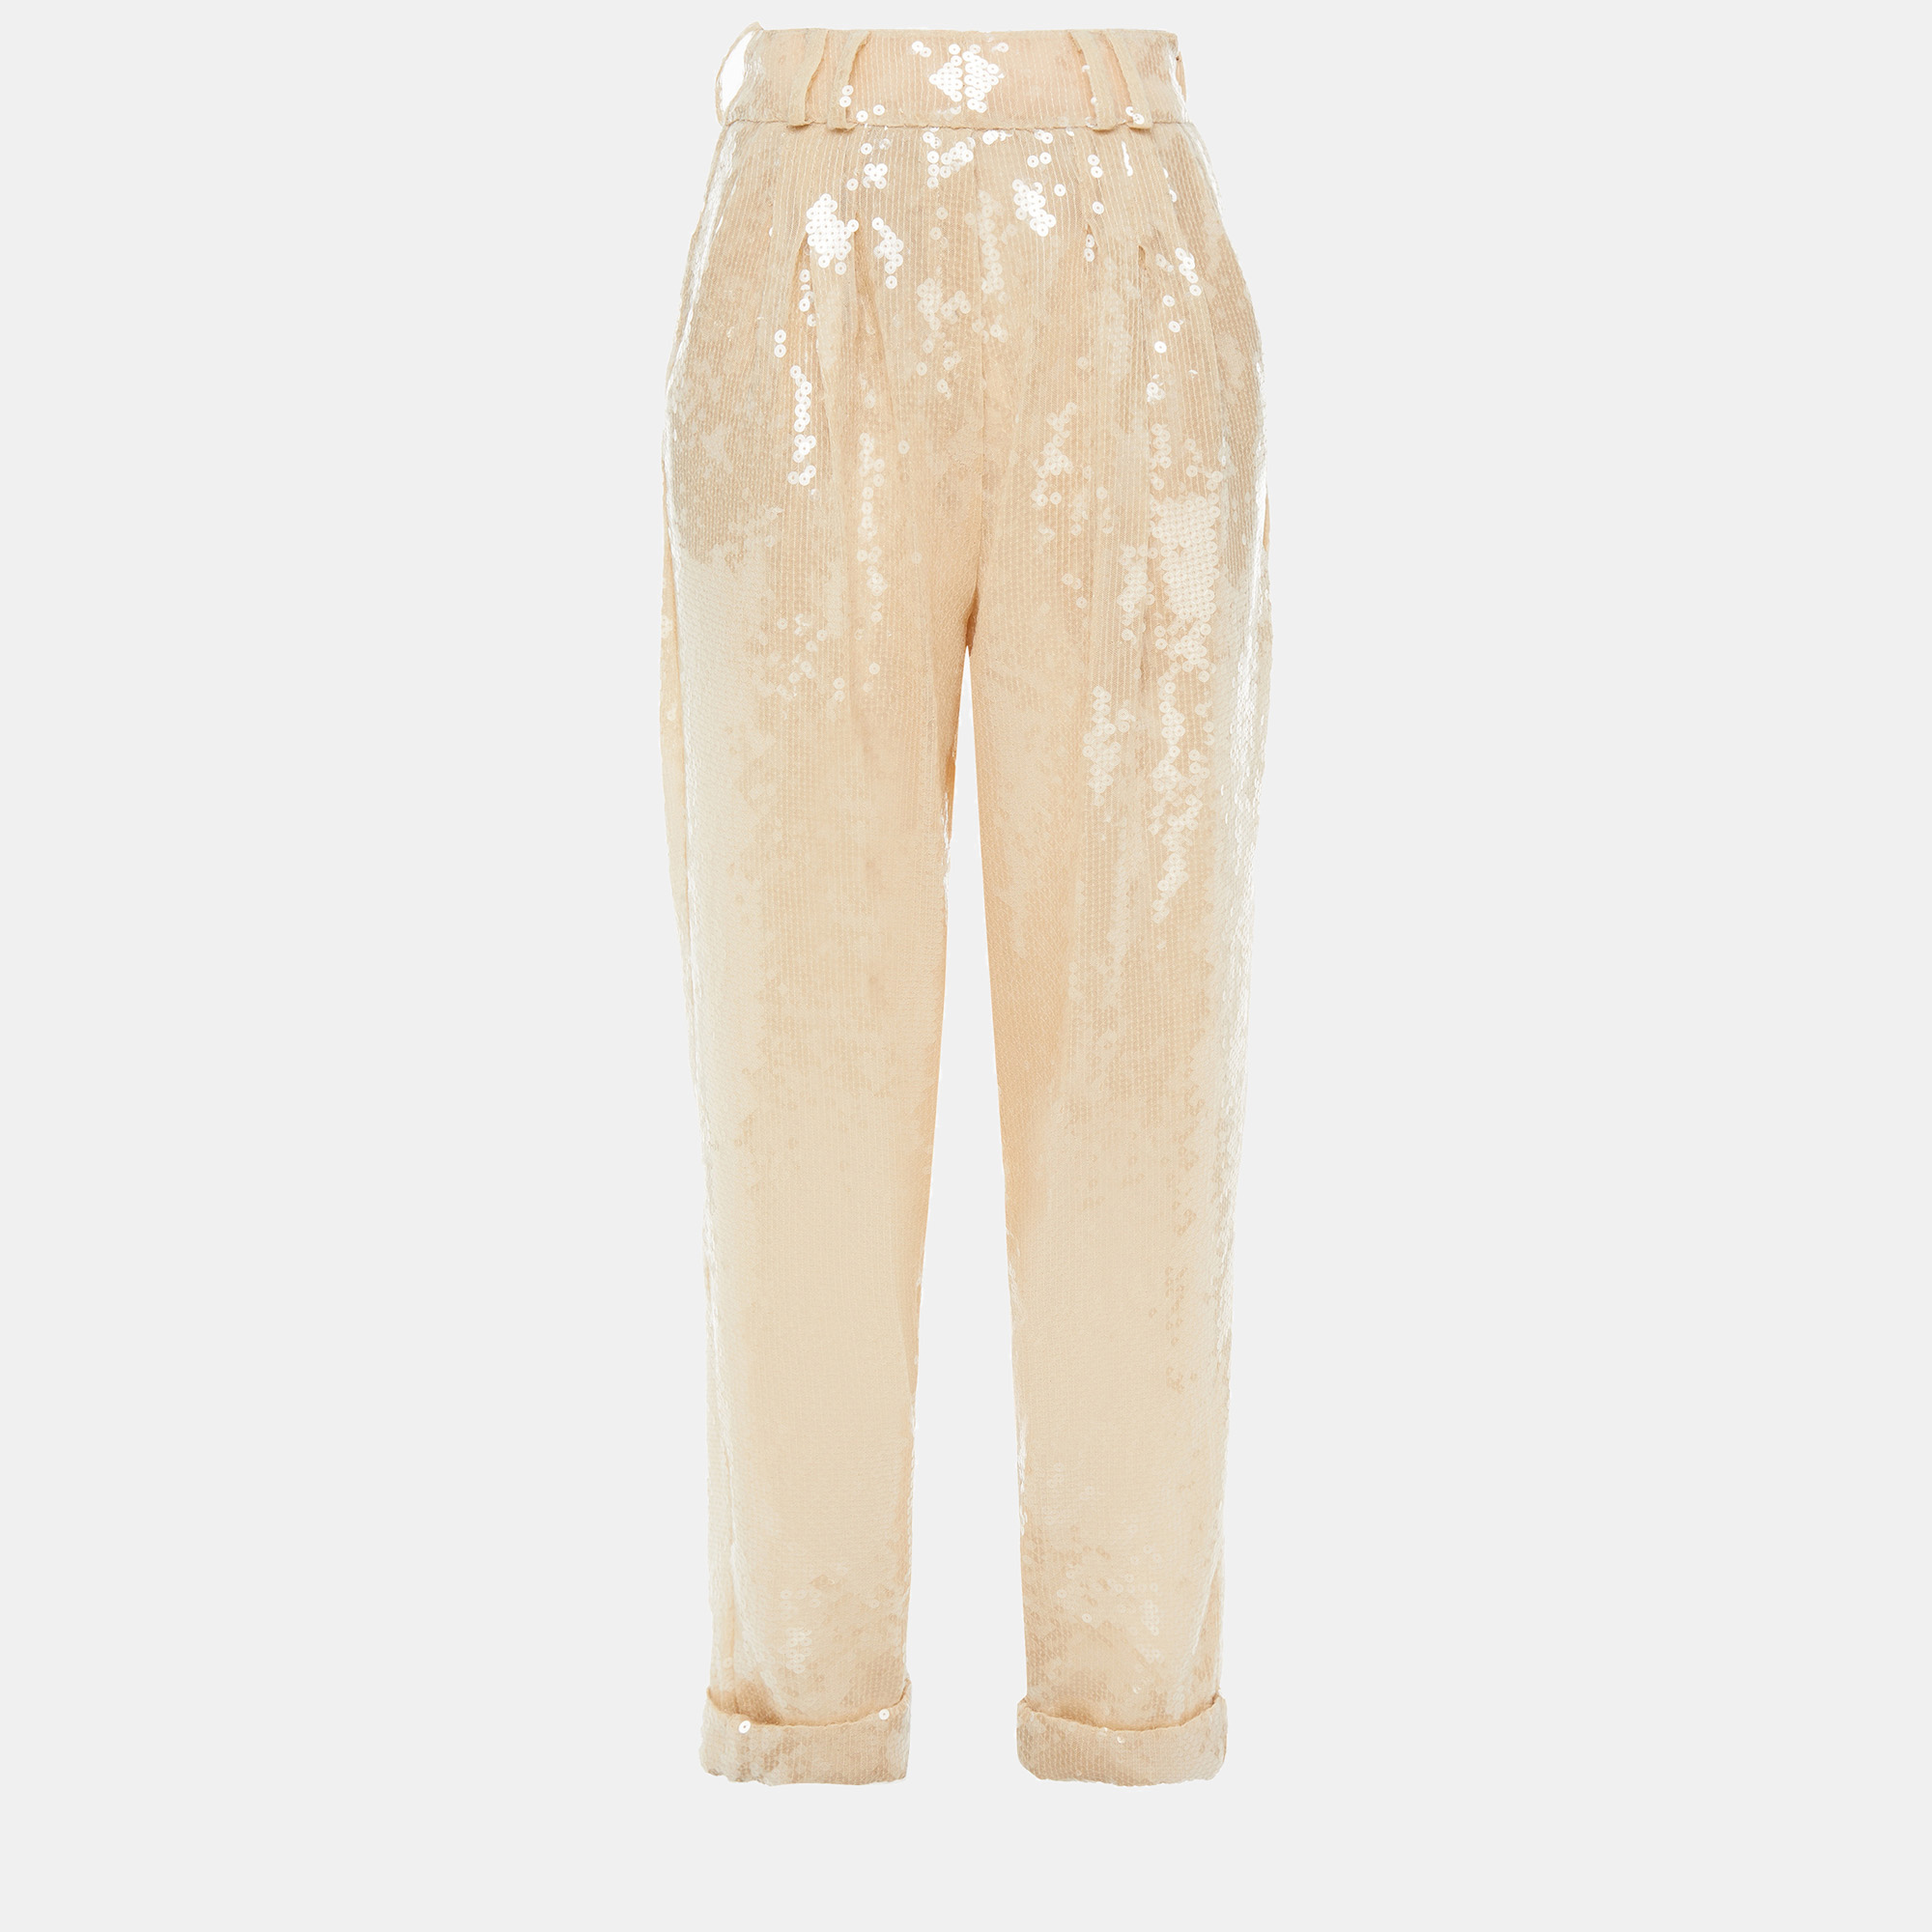 

Balmain Beige Sequined Tapered Pants  (FR 40